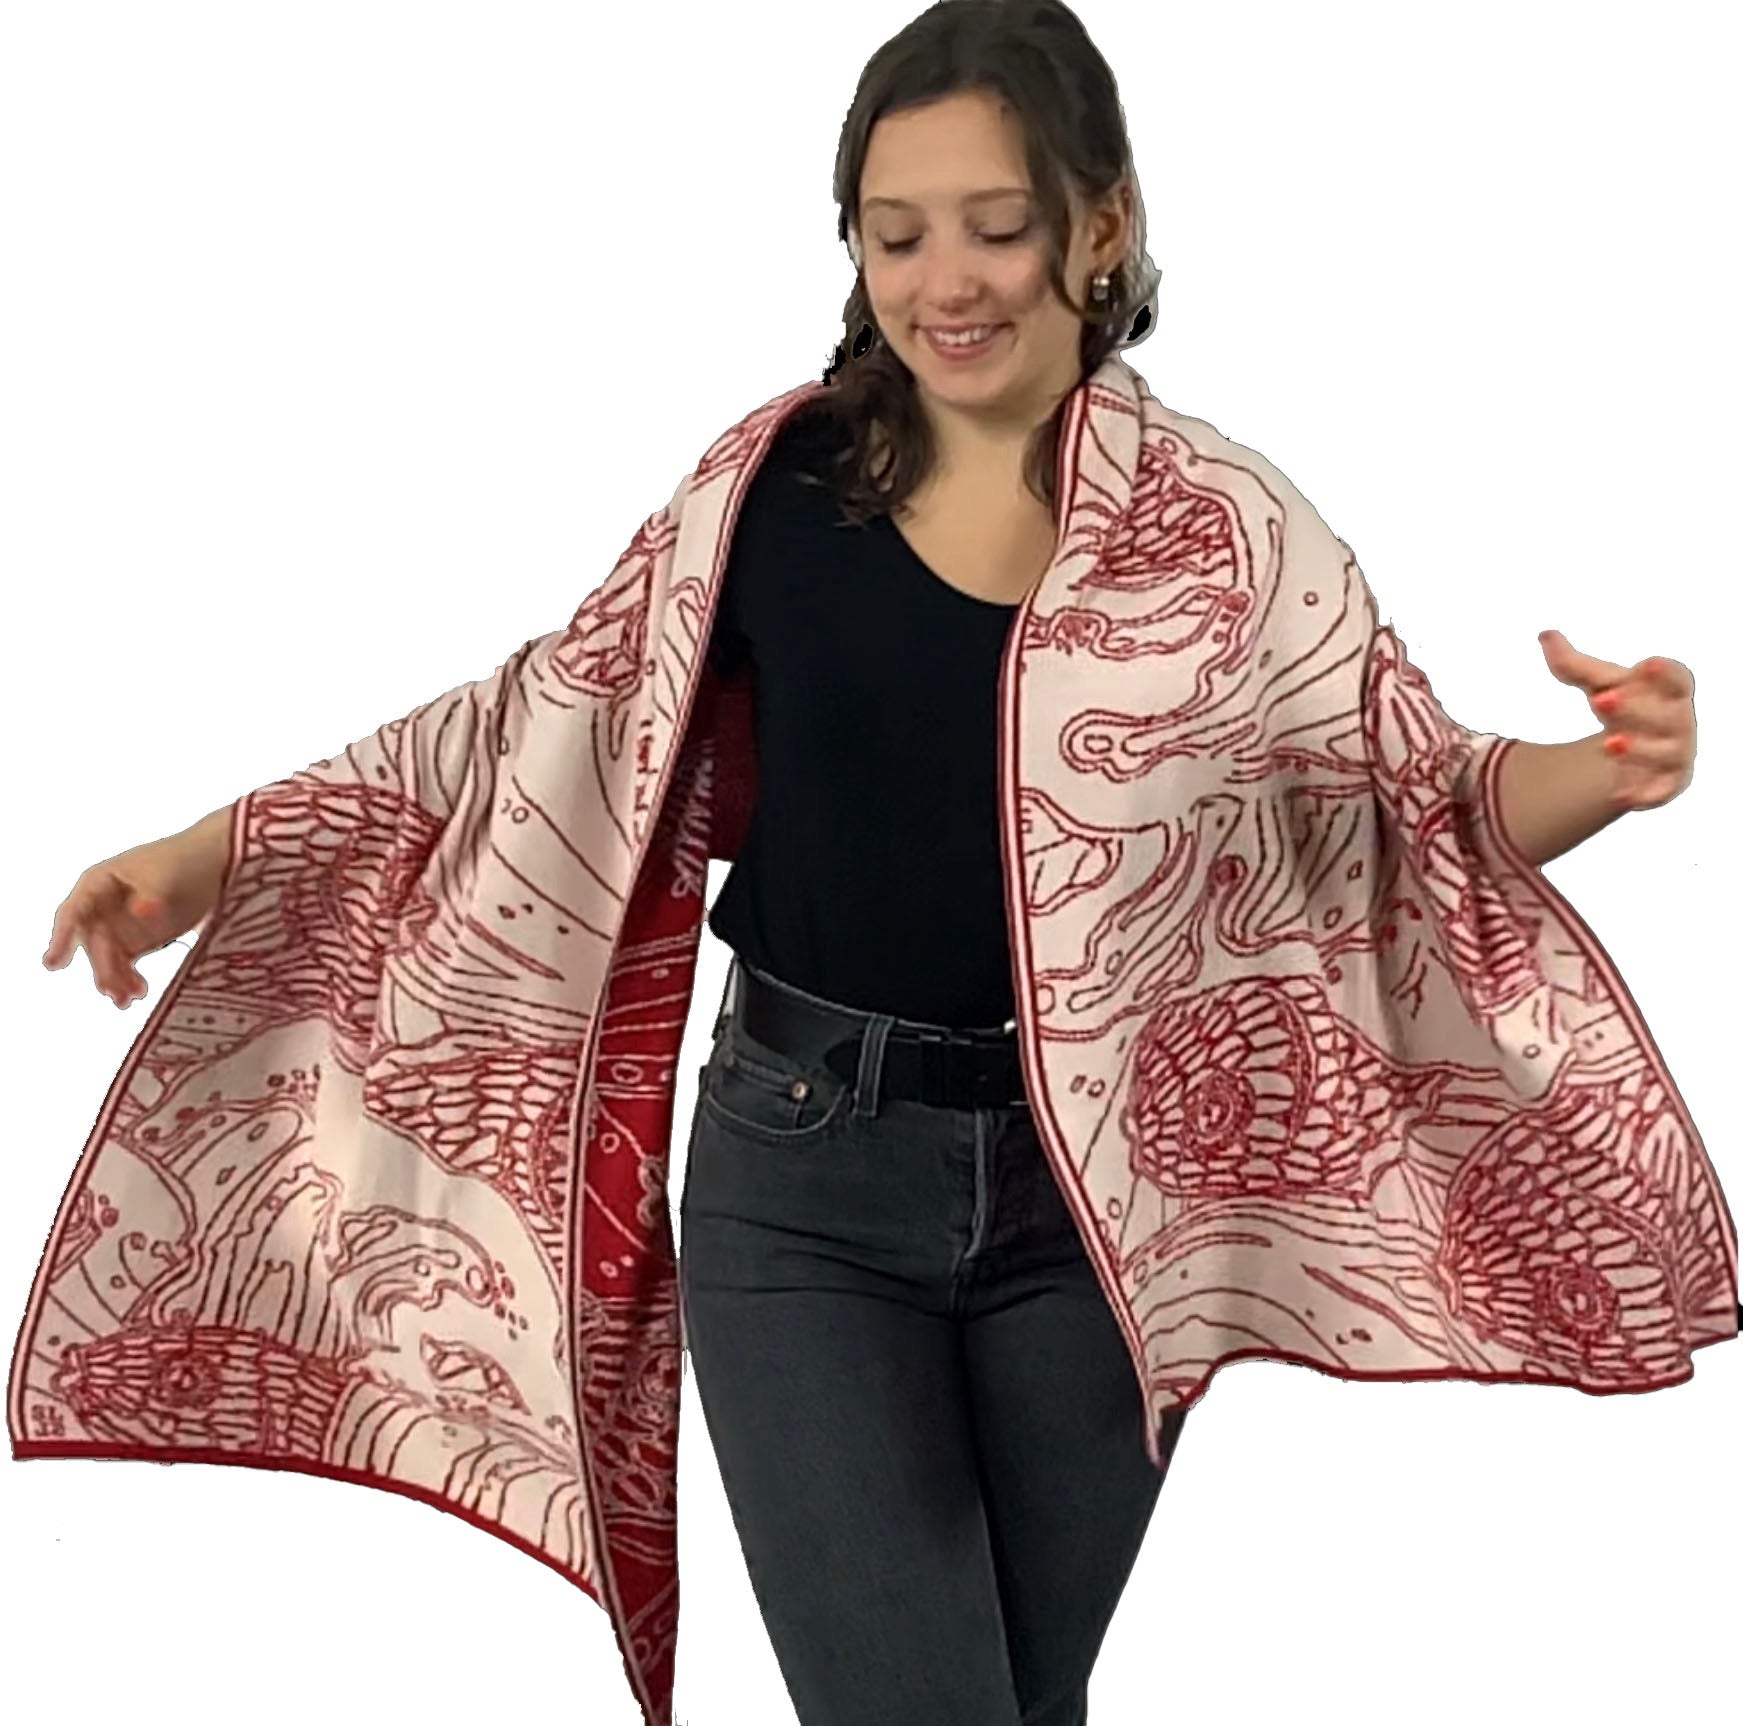 Ocean Reversible Shawl Scarf Wrap Red and Cream